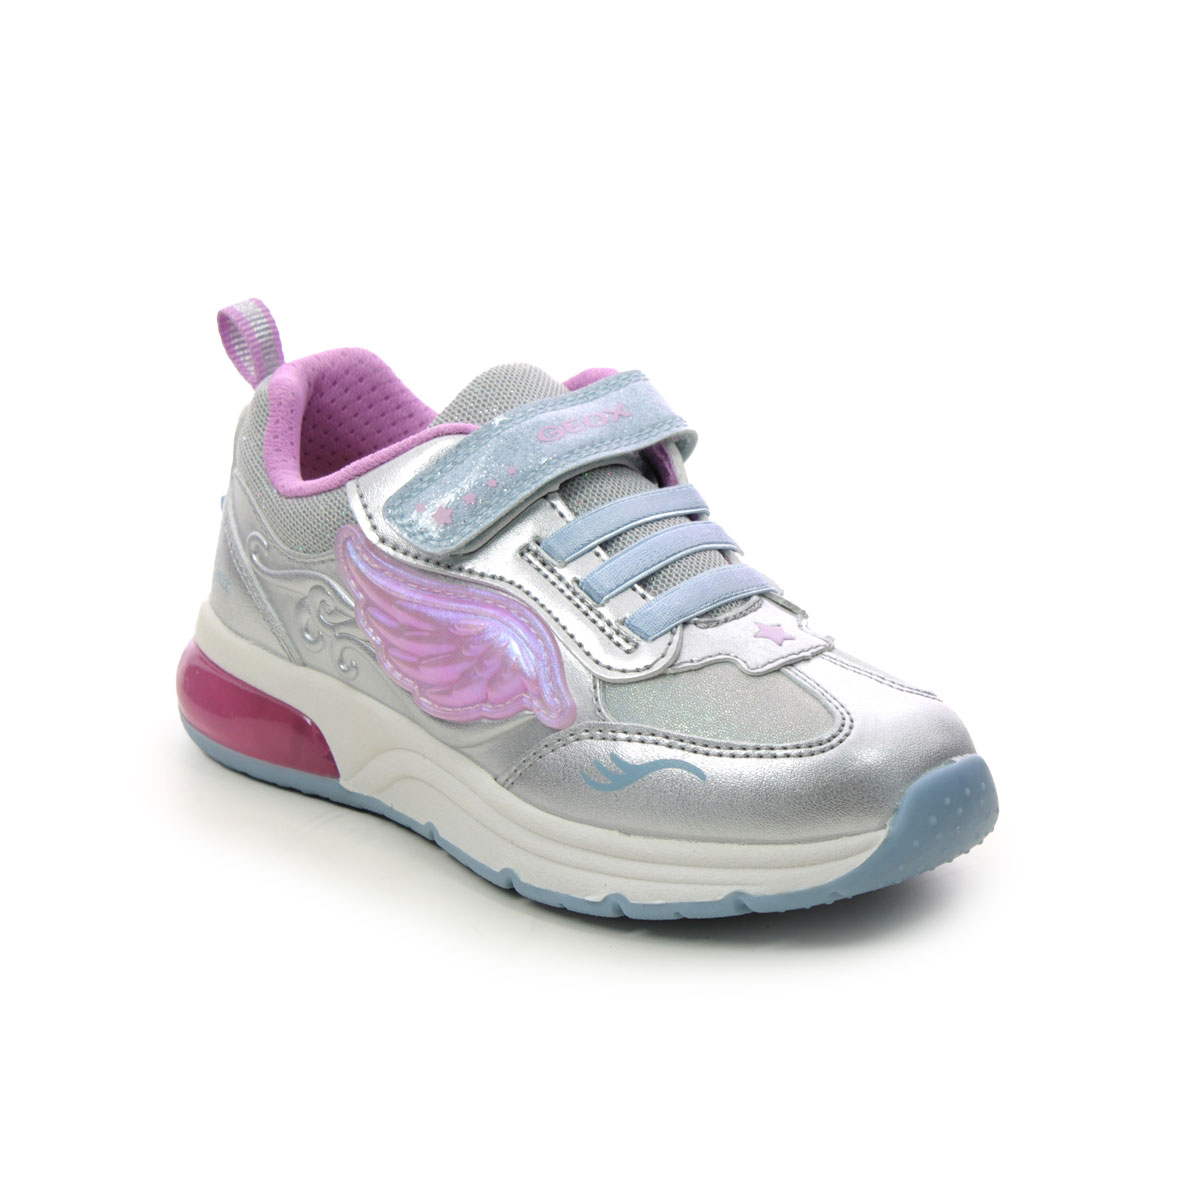 Geox Unicorn Spaceclub Silver Kids girls trainers J268VB-C0566 in a Plain Man-made in Size 25